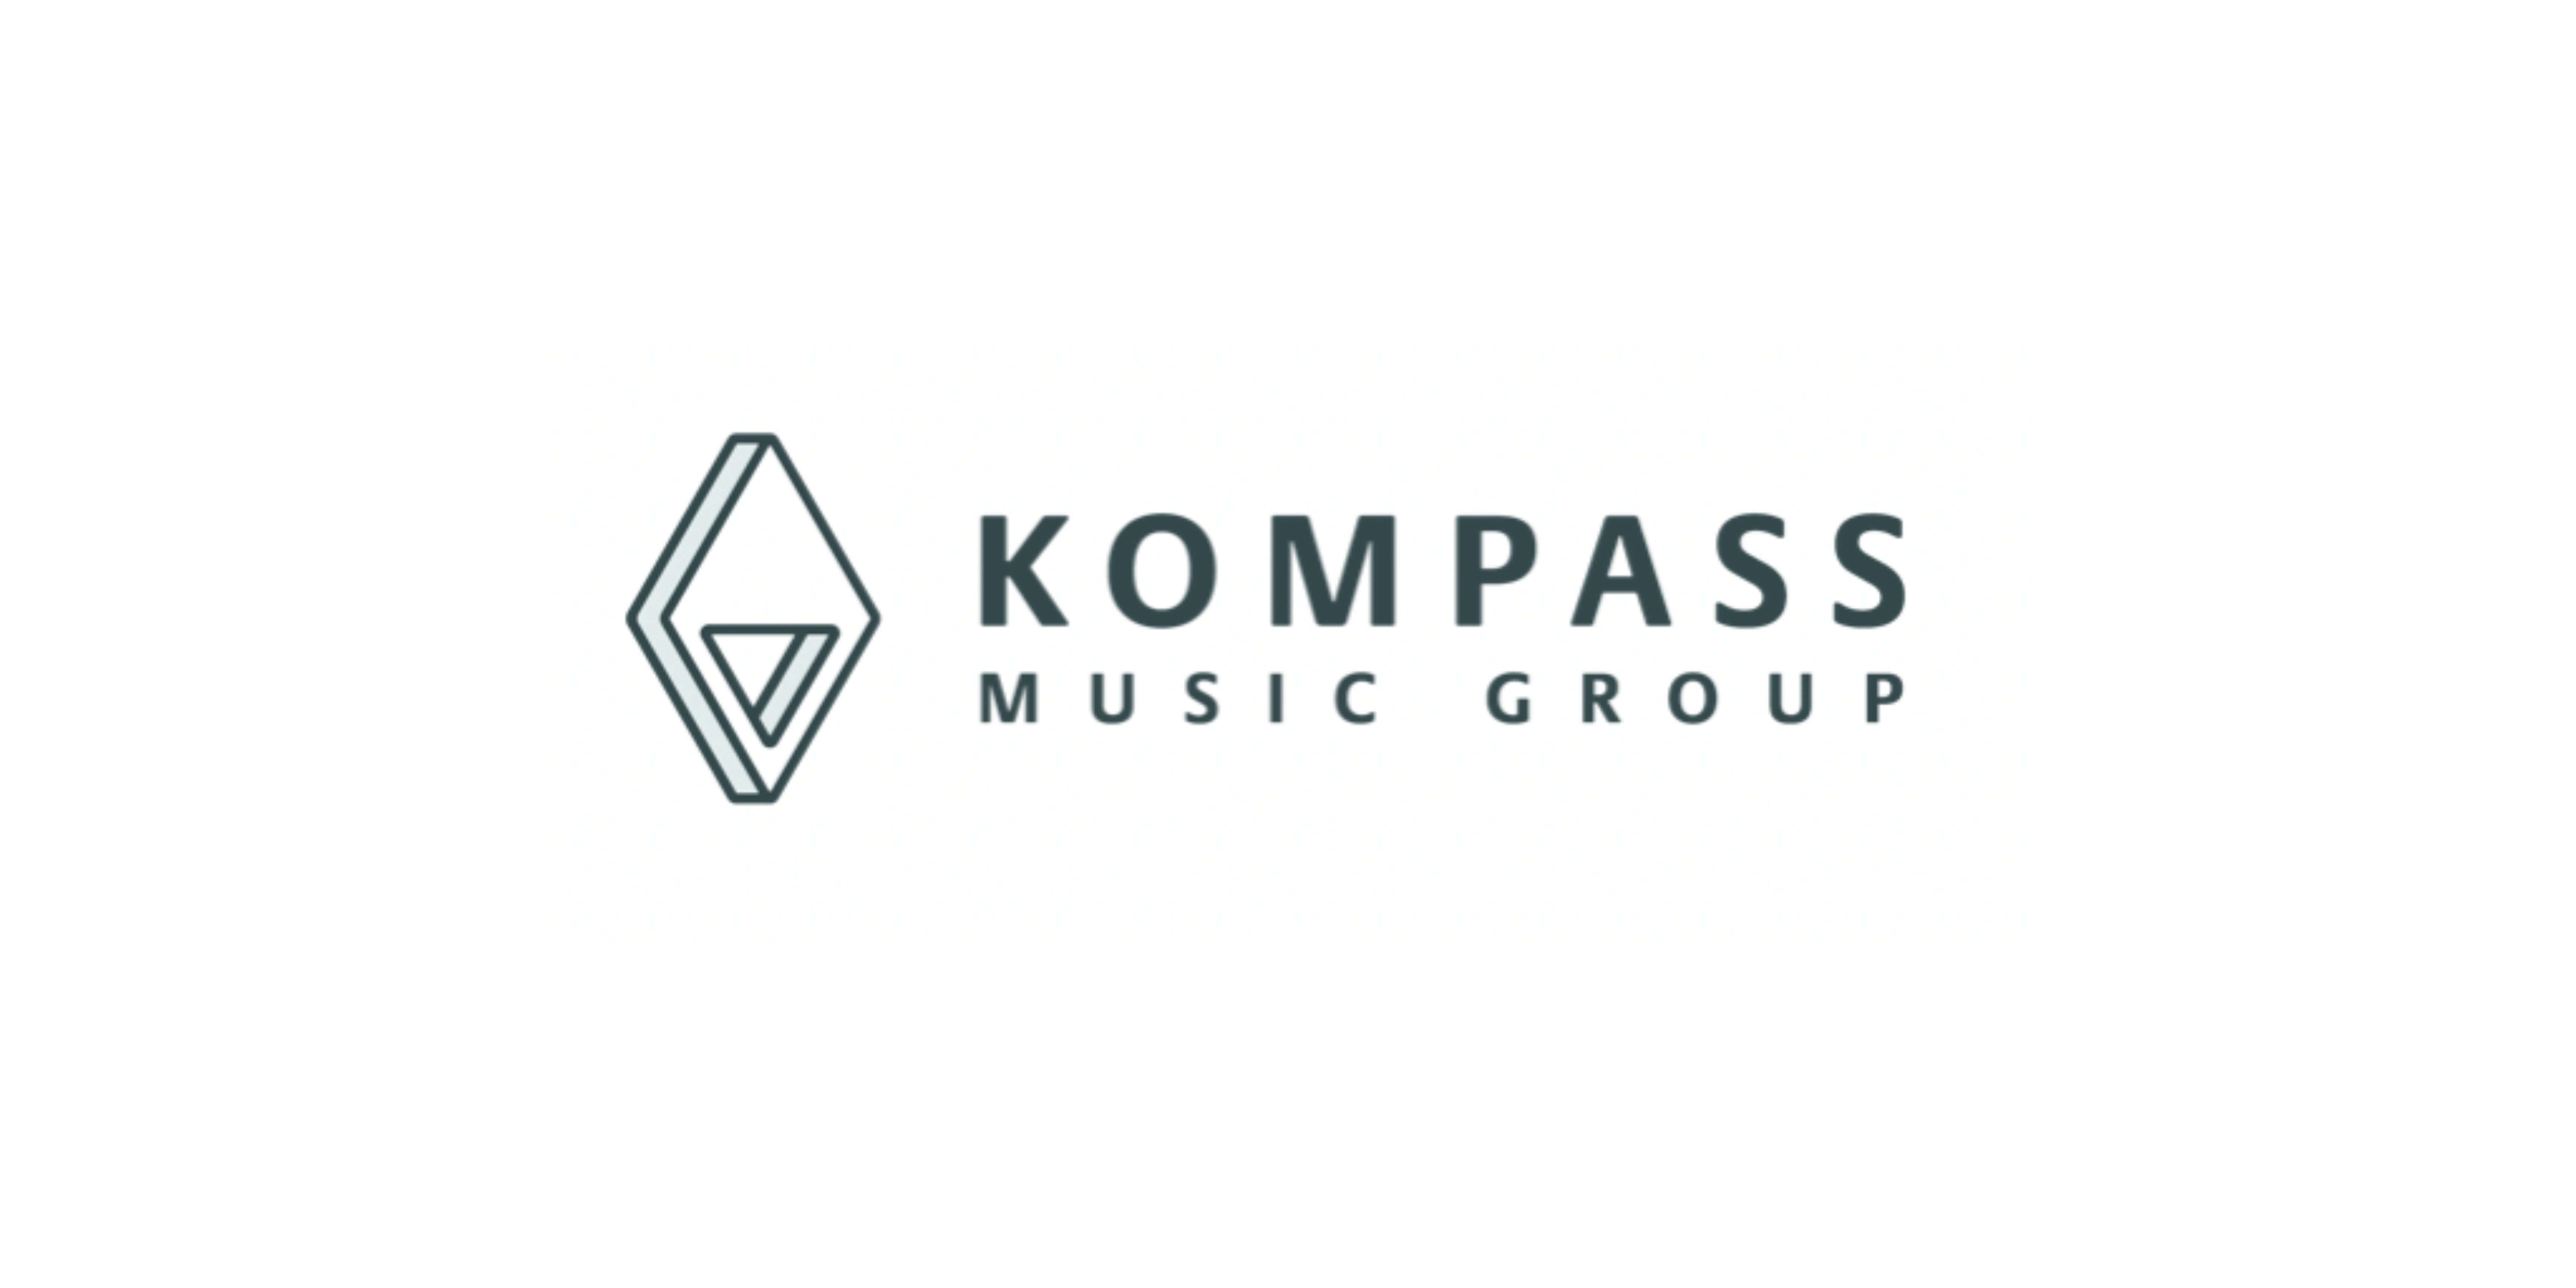 Kompass Music Group Takes the Music Scene to New Heights